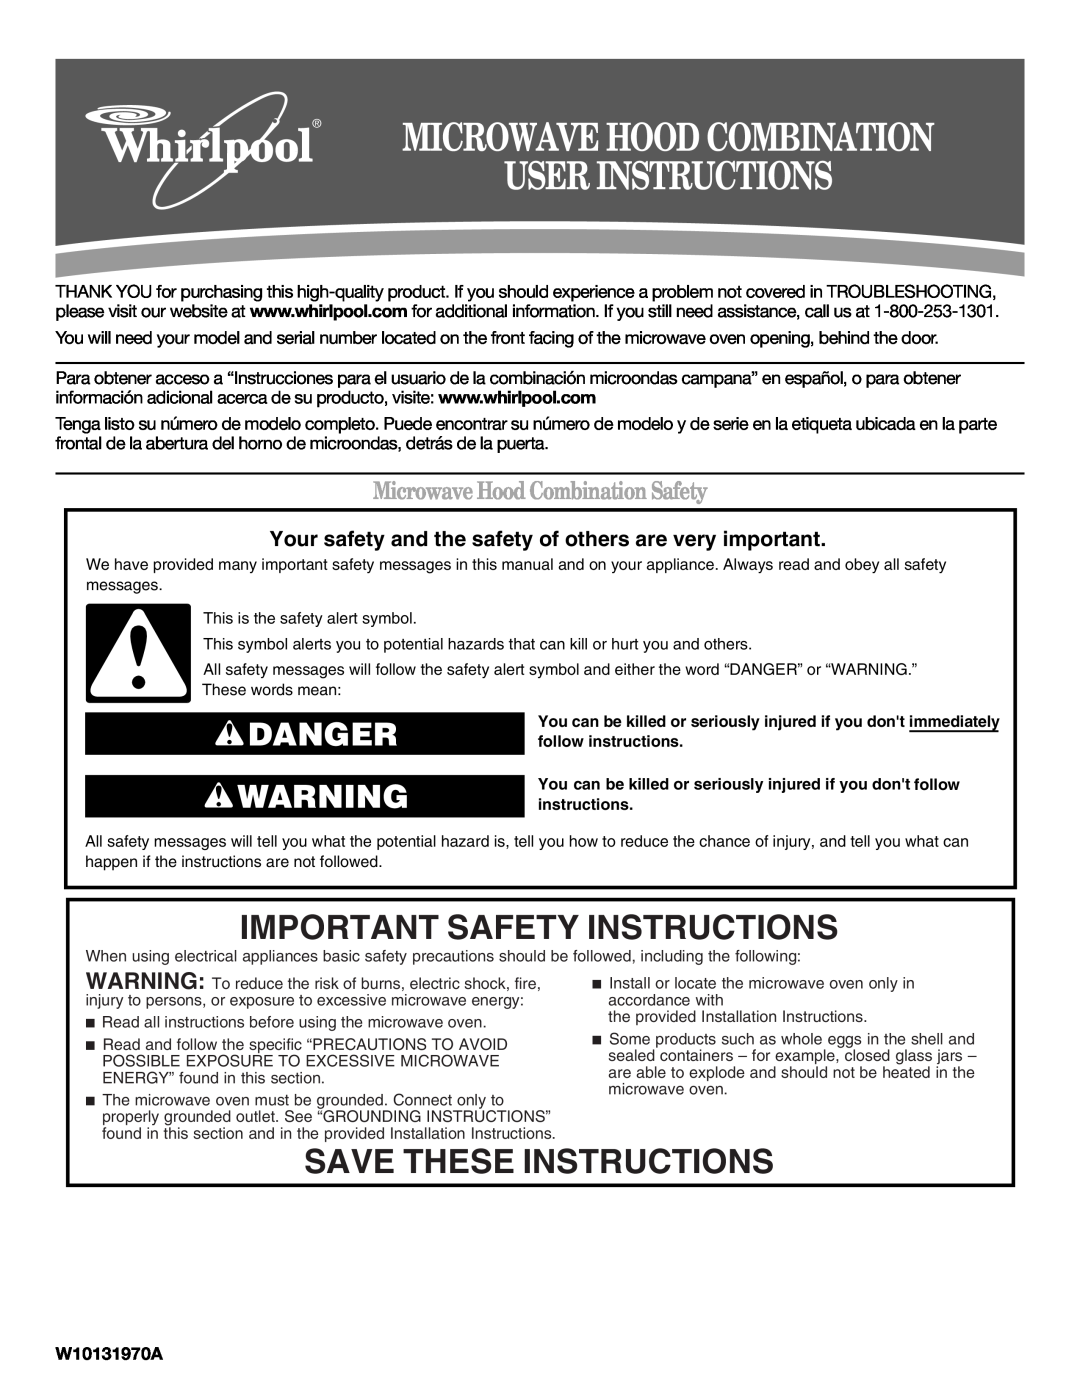 Whirlpool W10131970A important safety instructions Important Safety Instructions, Save These Instructions, Danger 